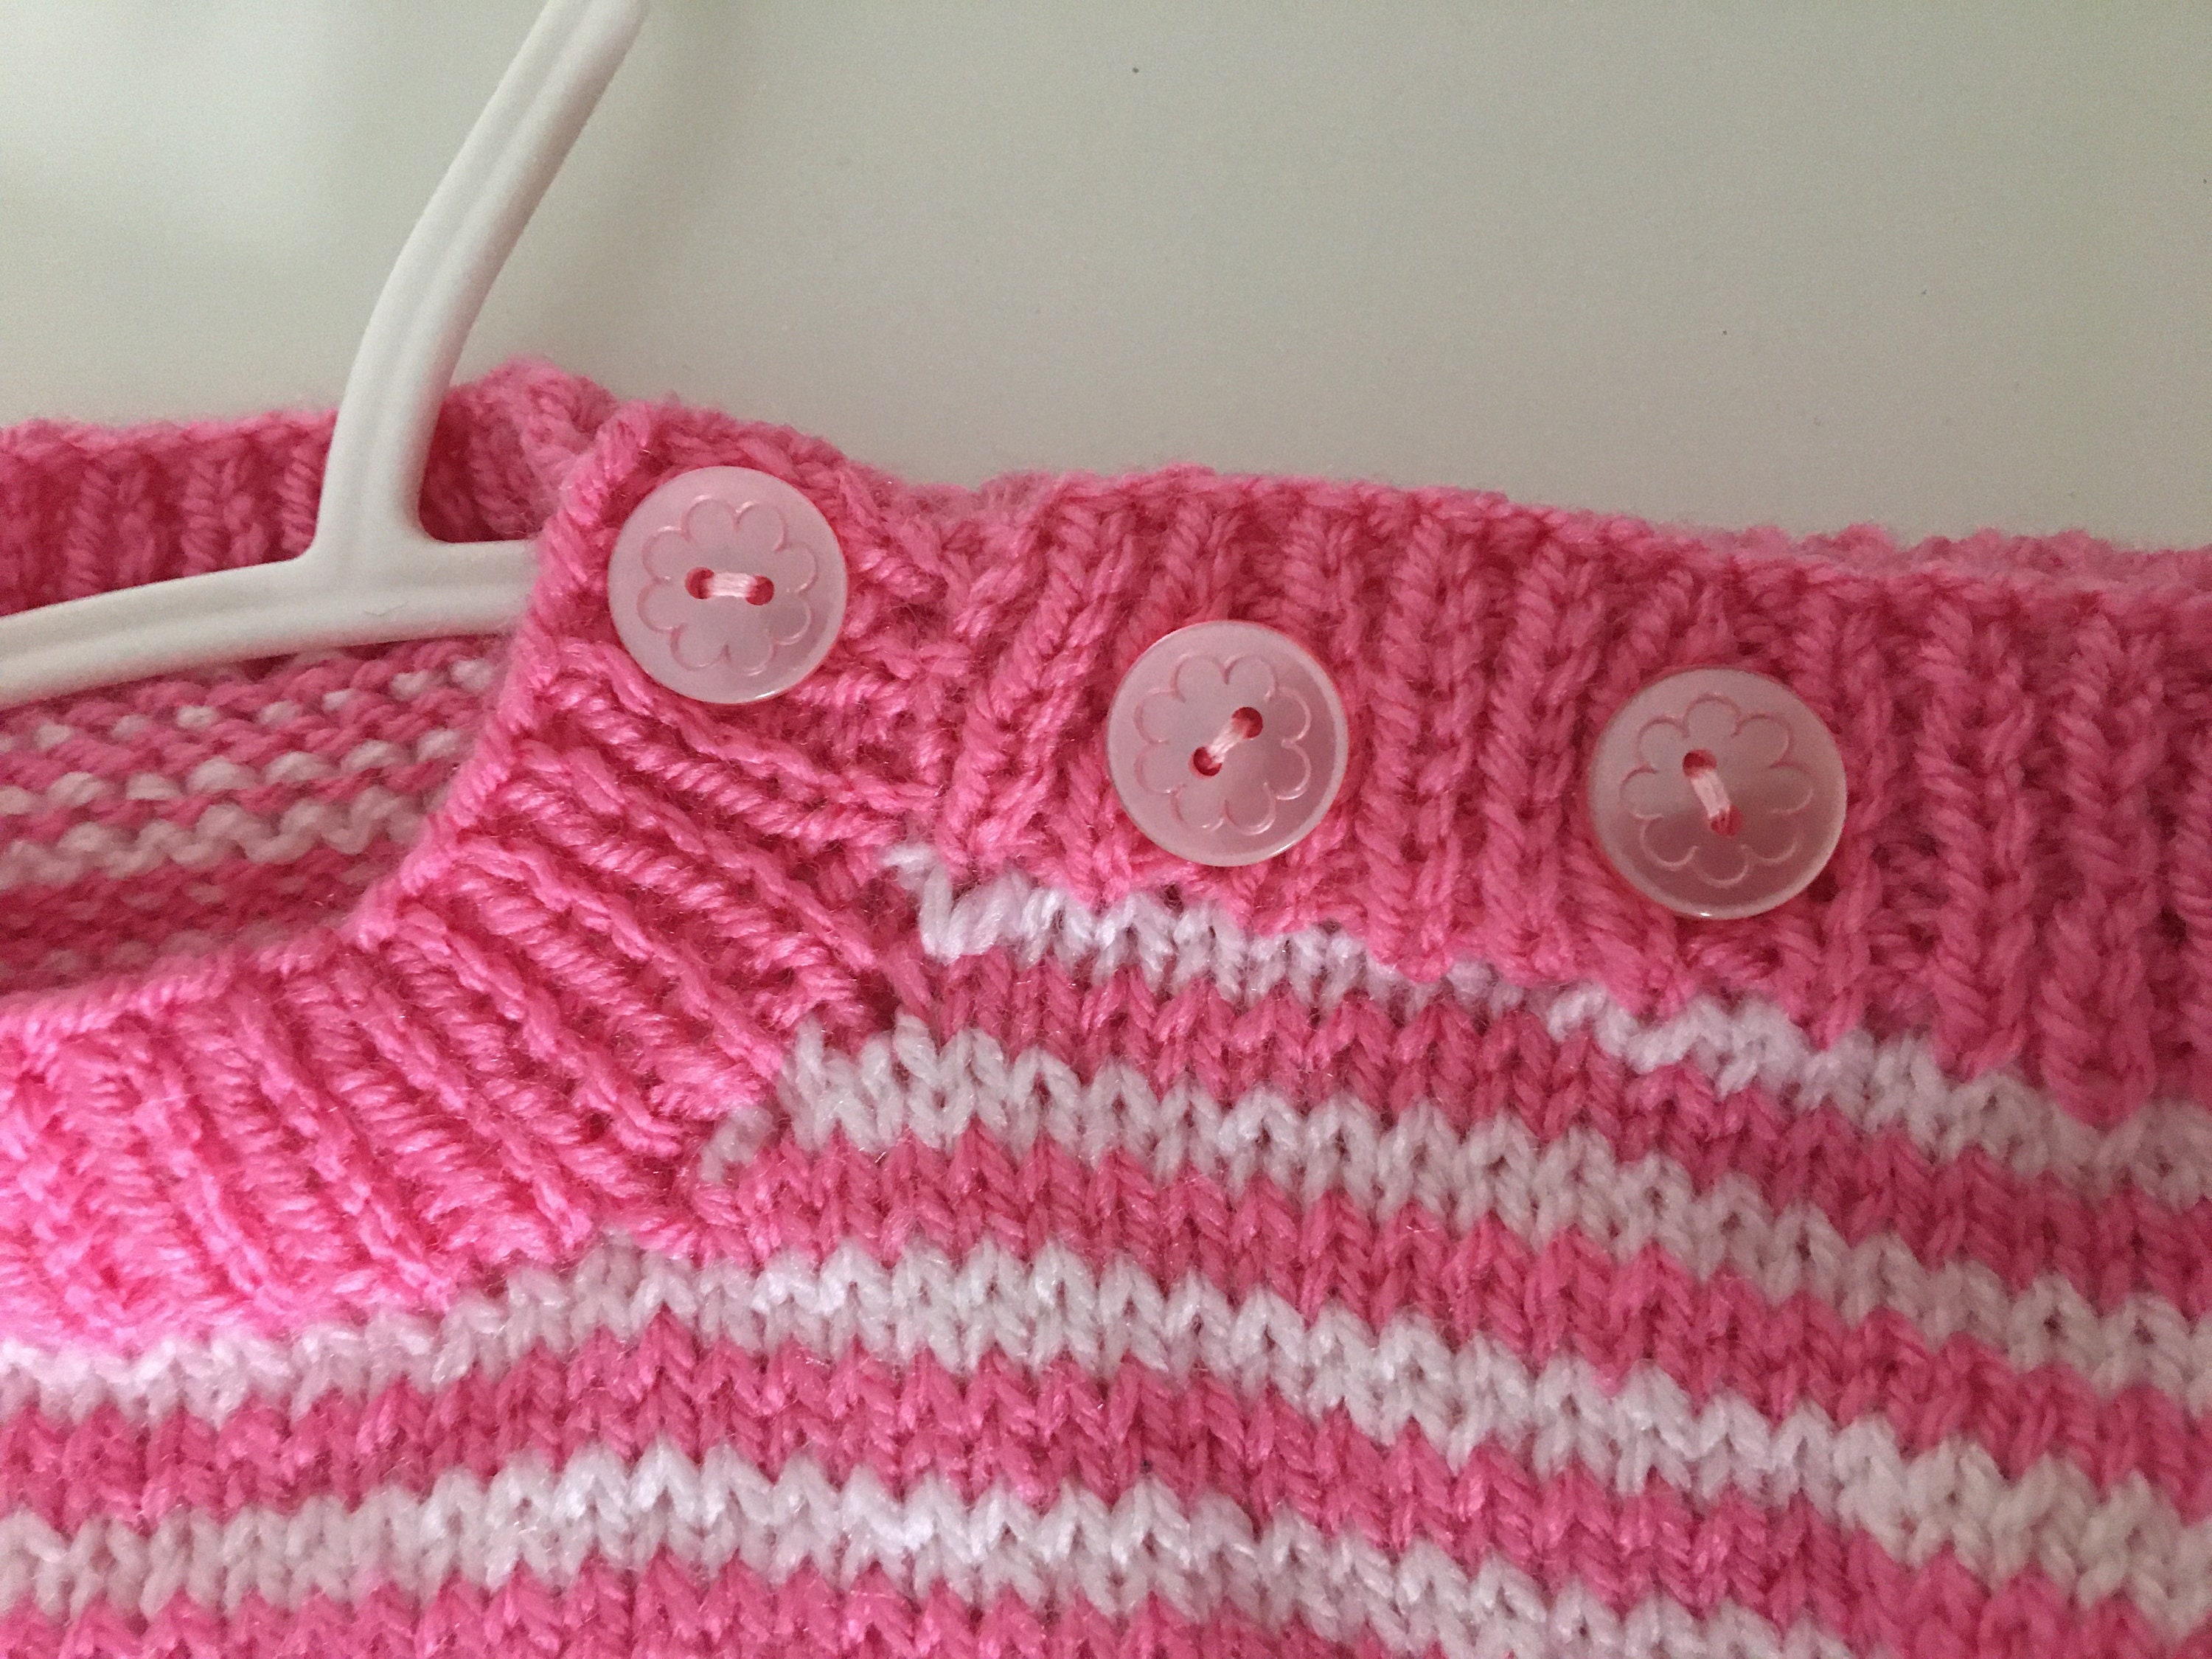 Knit heart baby sweater hand knit baby clothes baby girl | Etsy